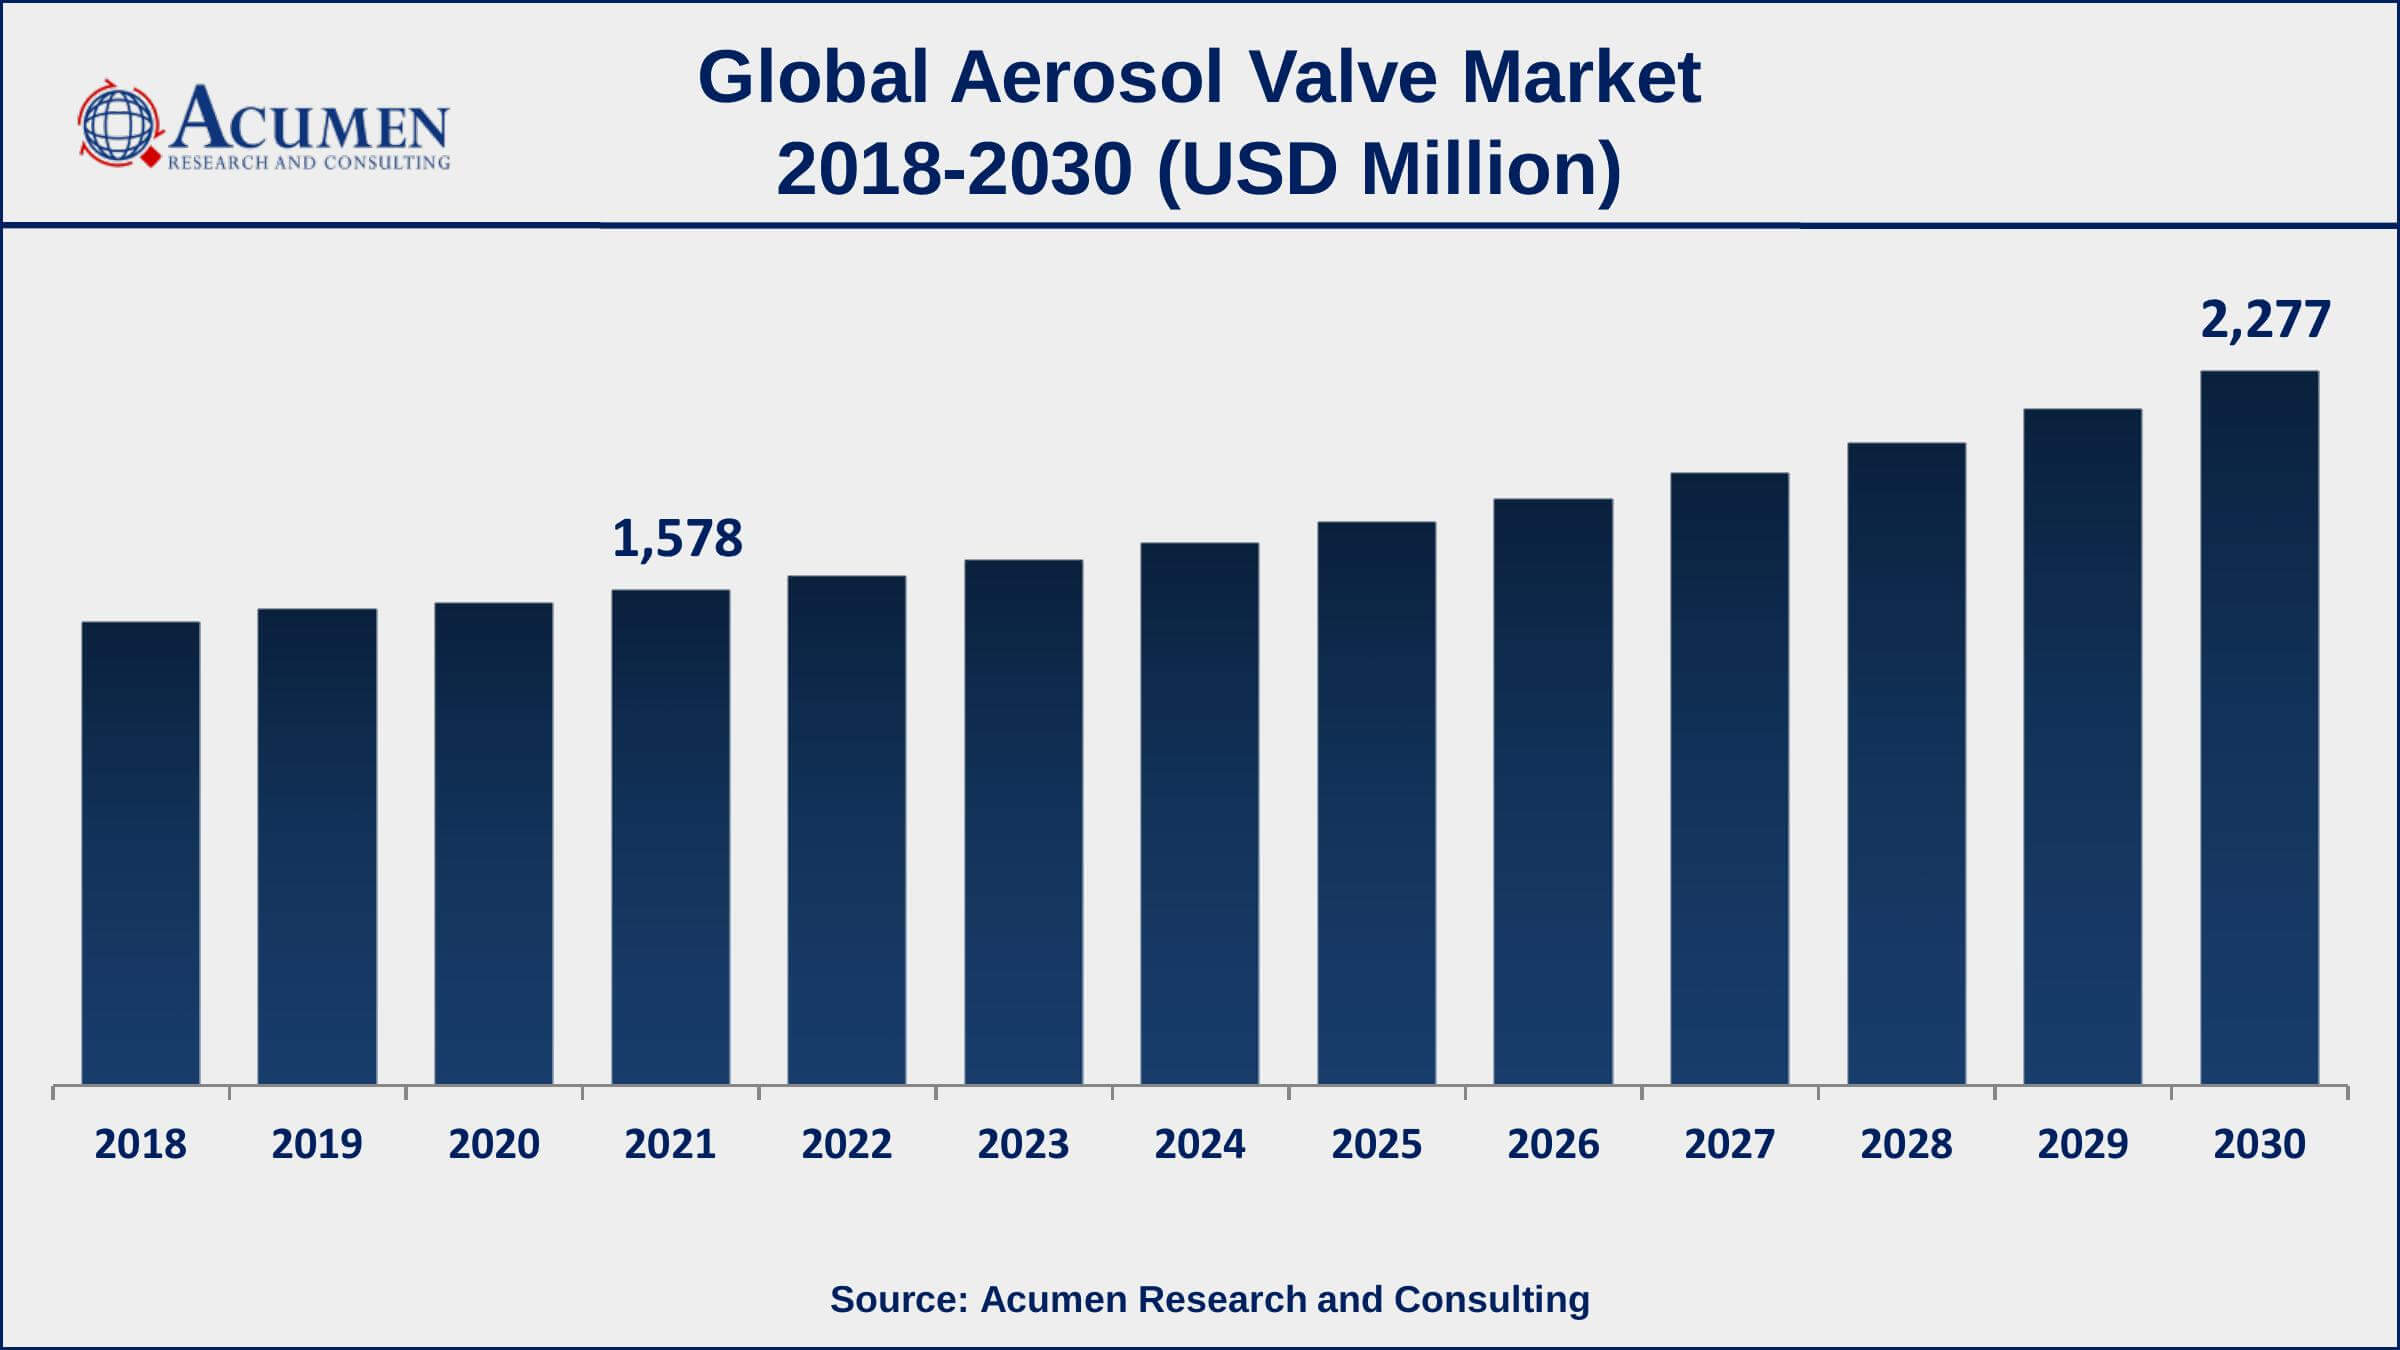 Asia-Pacific aerosol valve market growth will observe highest CAGR from 2022 to 2030